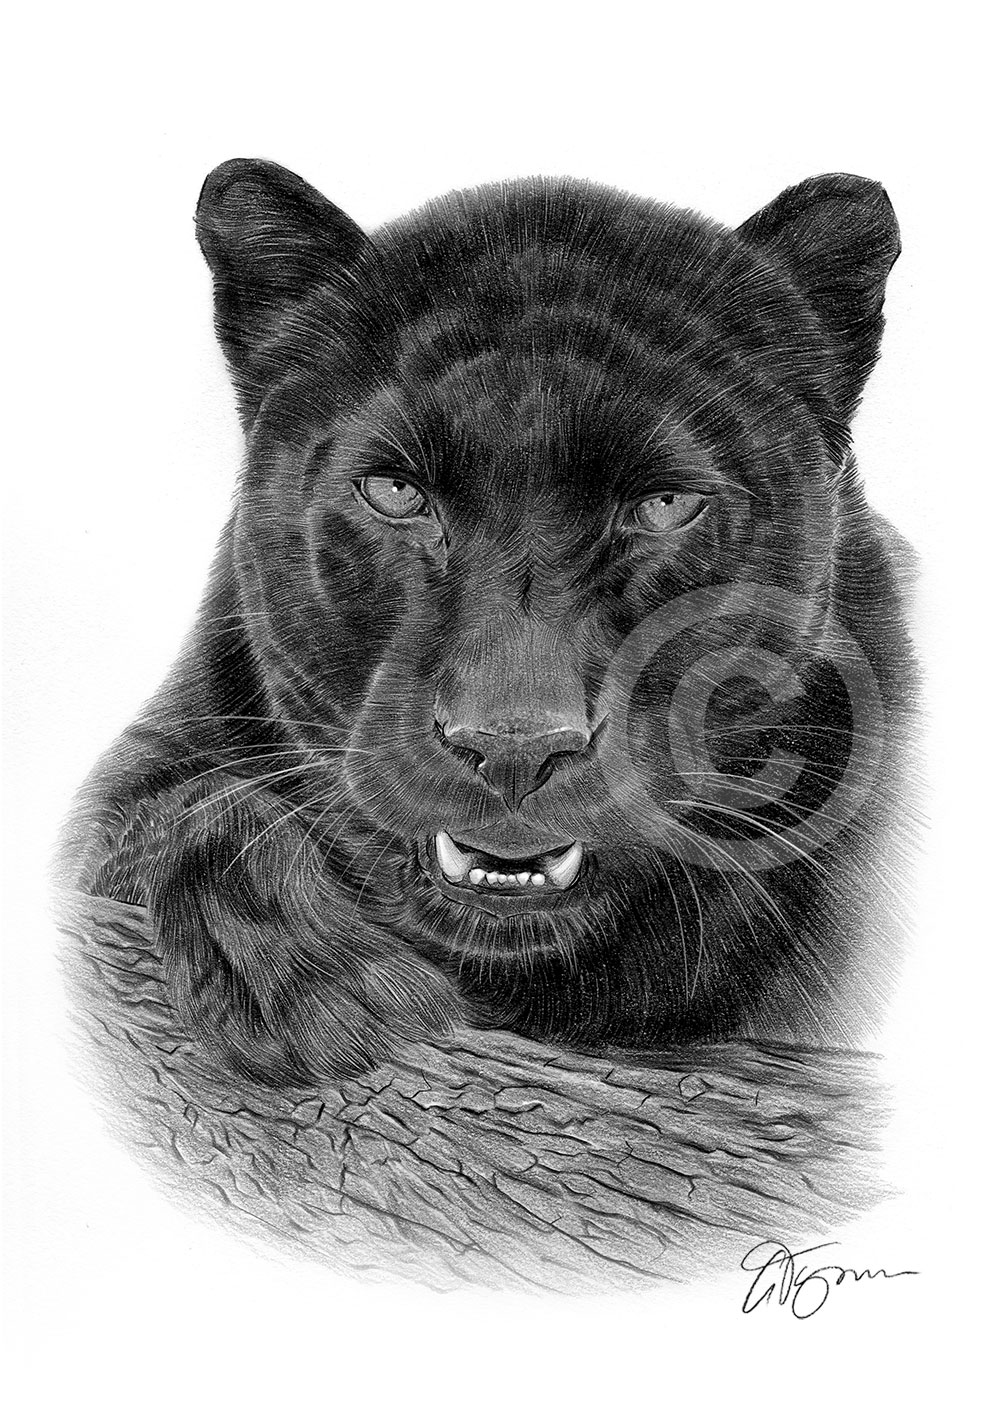 Pencil drawing of an adult black panther by UK artist Gary Tymon